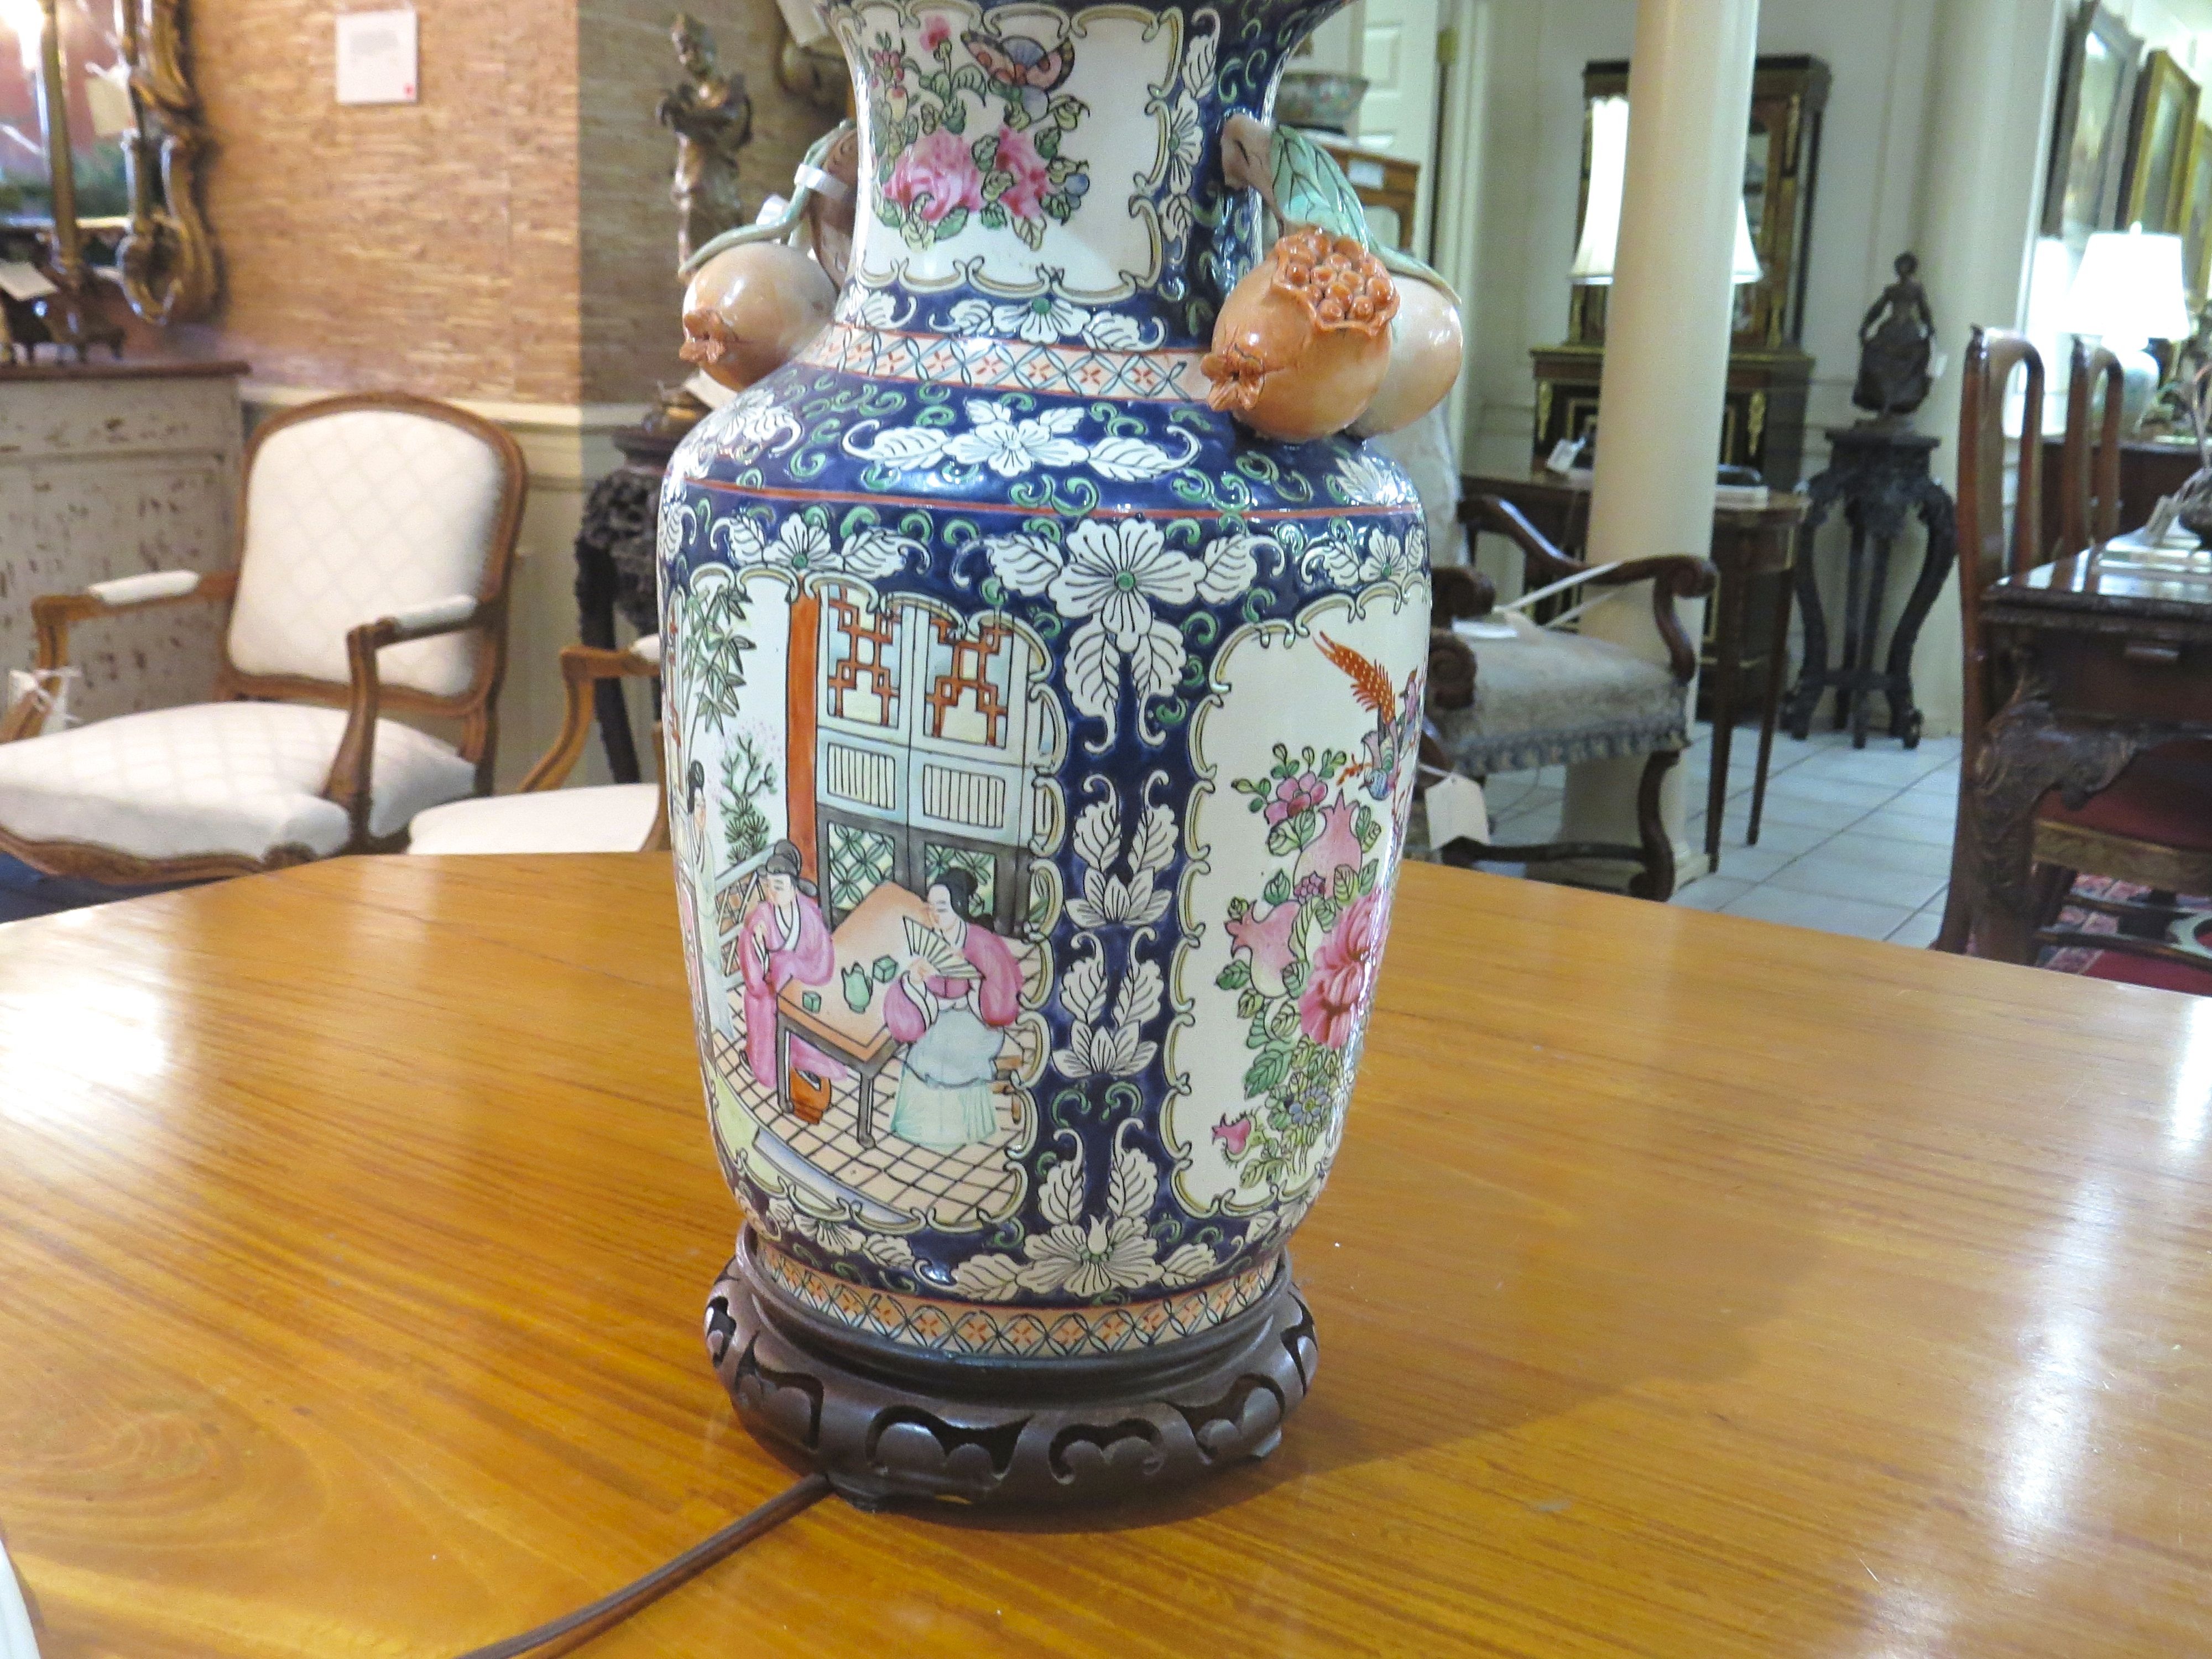 Chinese Porcelain Vase Lamp with Pomegranate Handles  SOLD